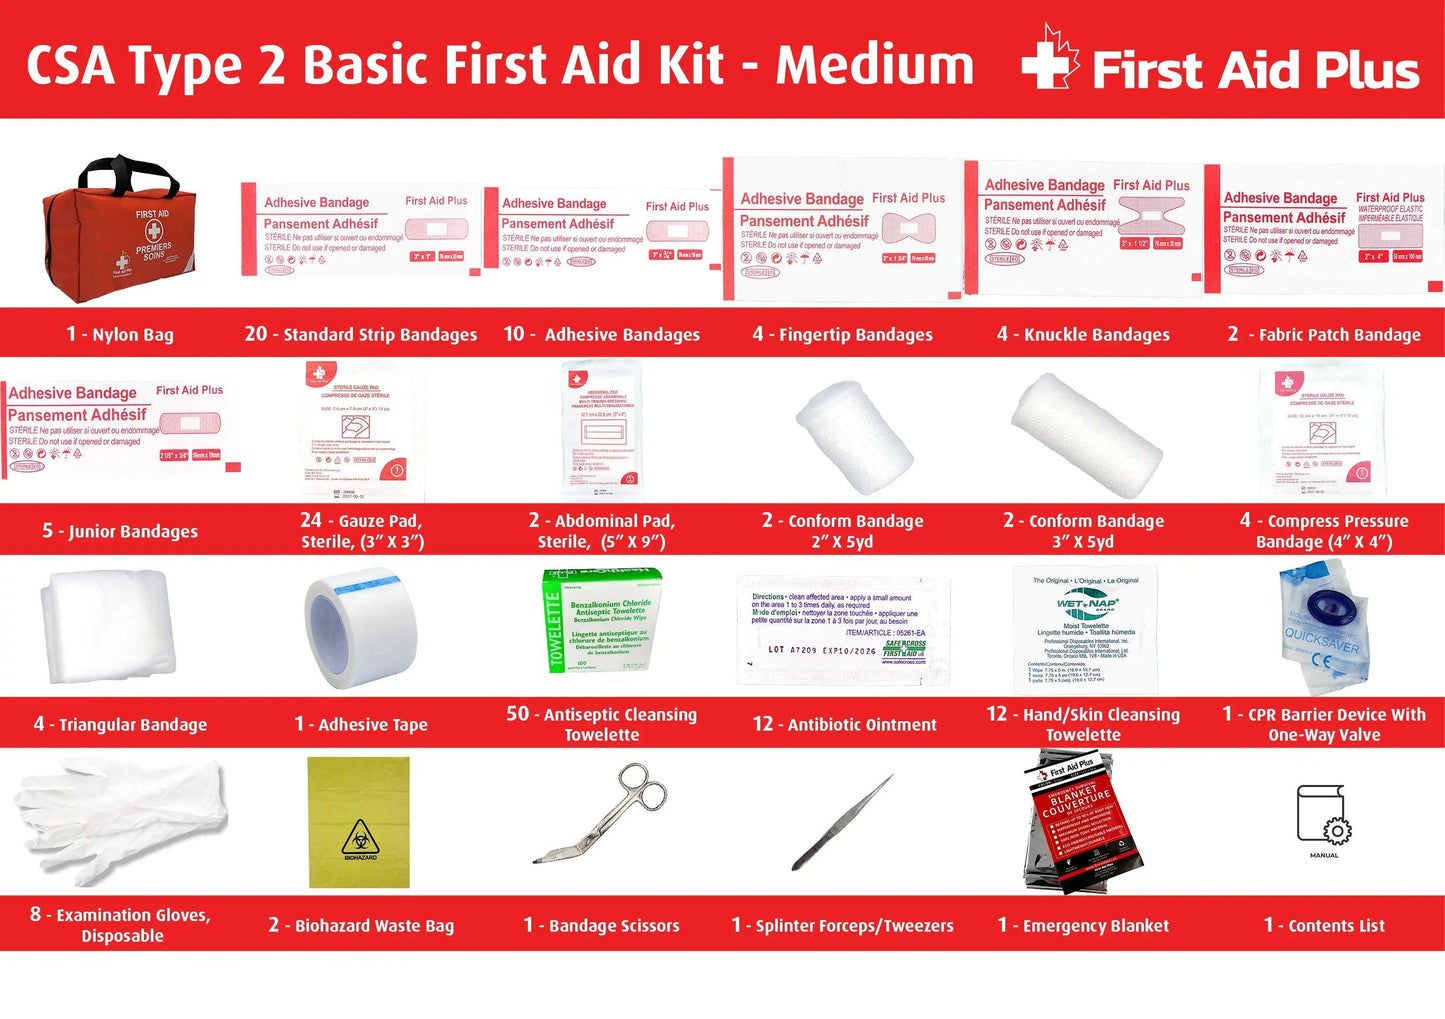 CSA Type 2 Basic First Aid Kit - Medium (26-50 Workers) - First Aid Plus